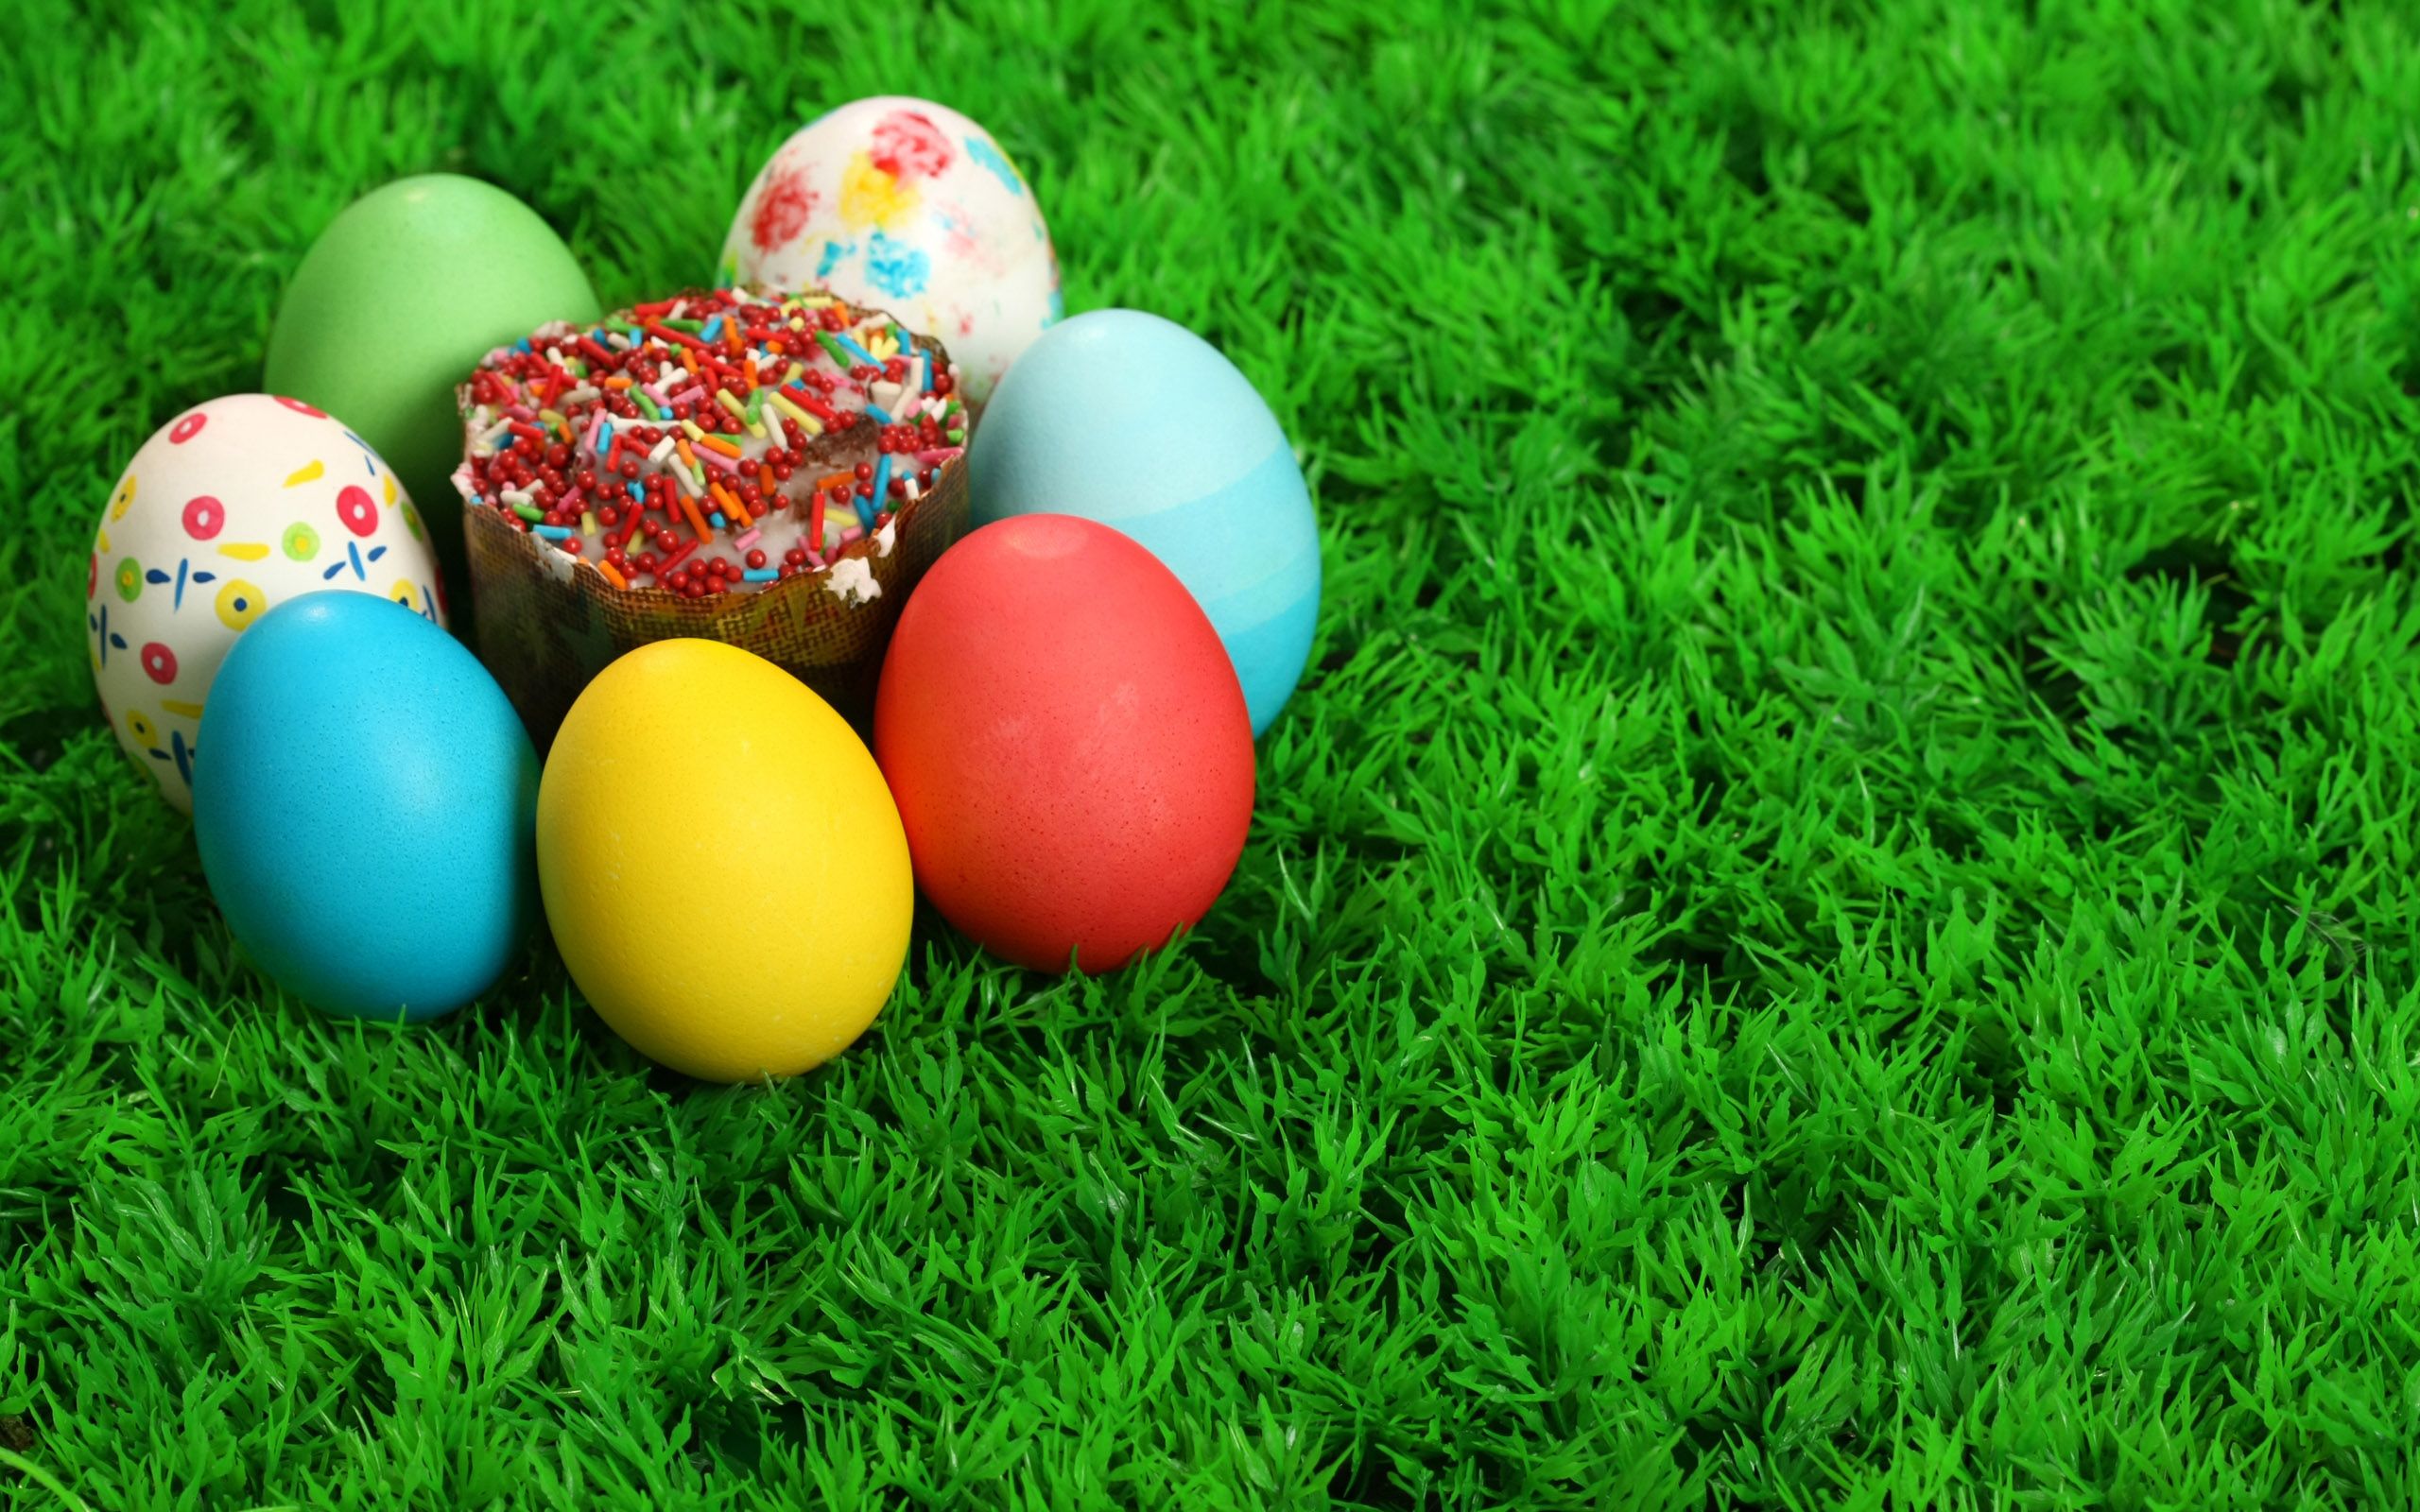 Miscellaneous Holidays Easter And Eggs On The Grass Picture